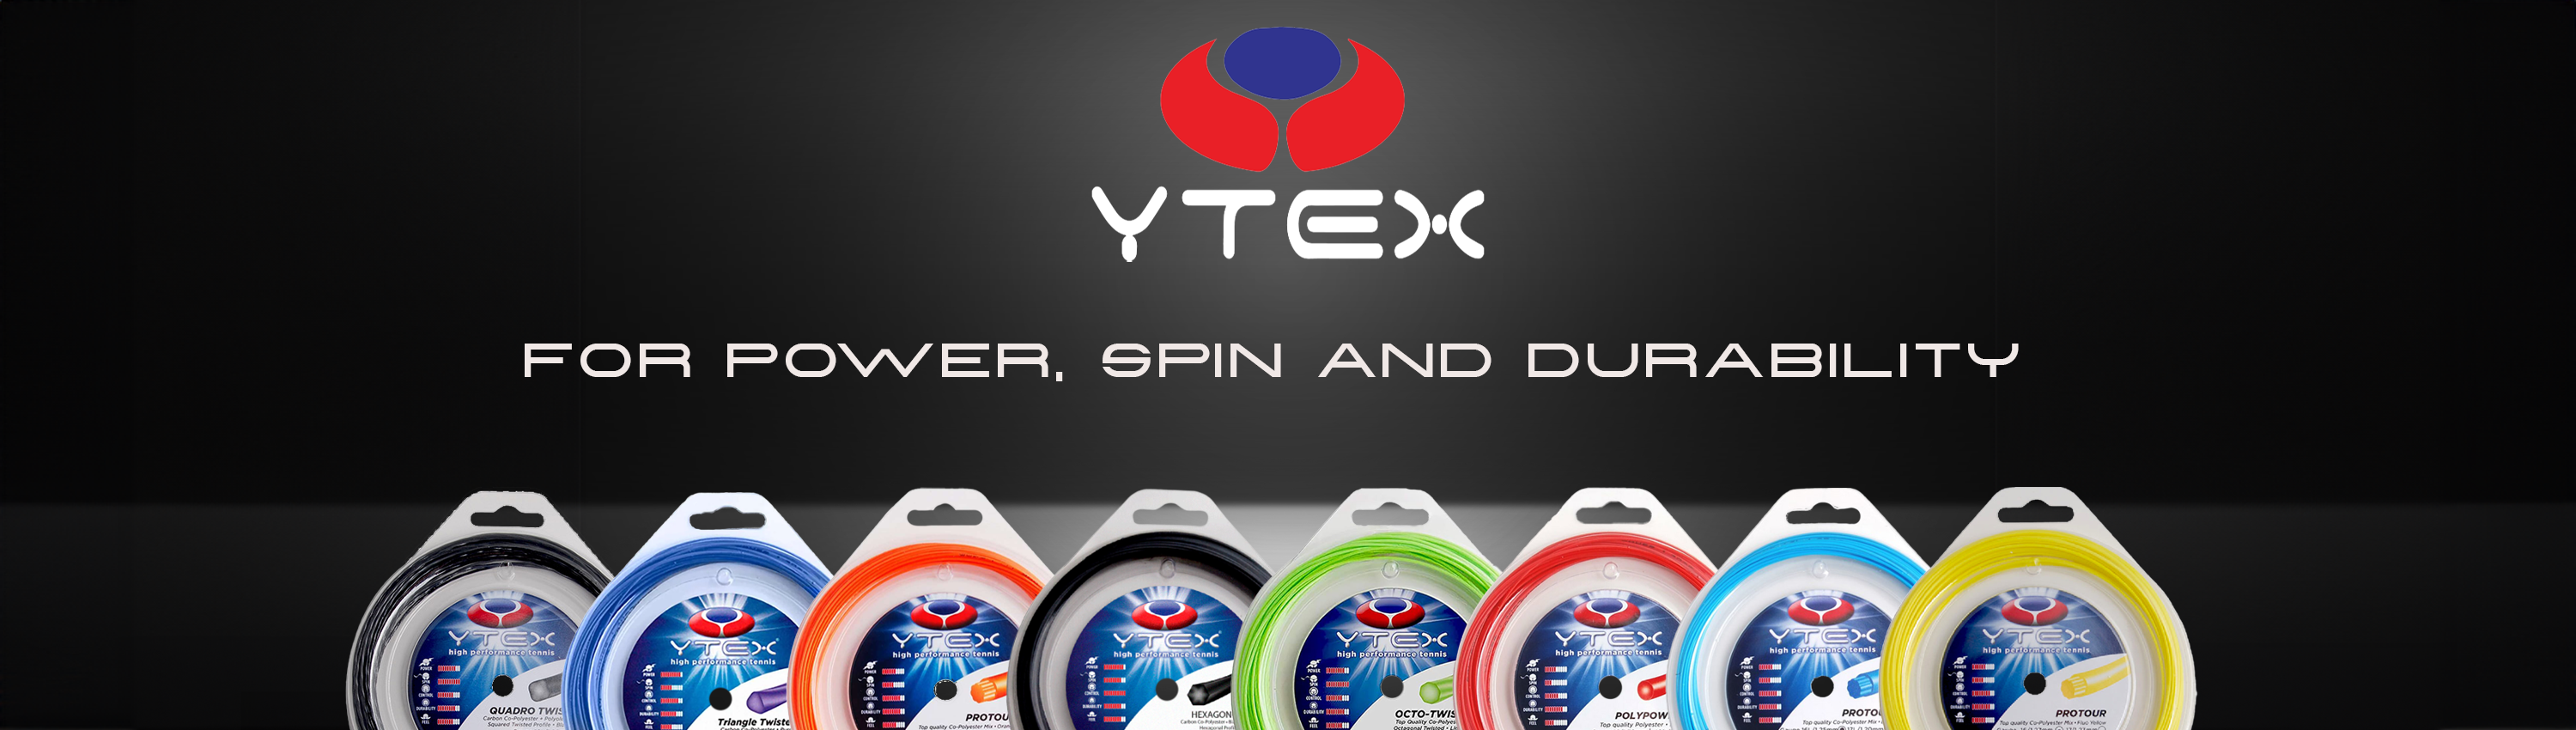 YTEX Wholesale Page